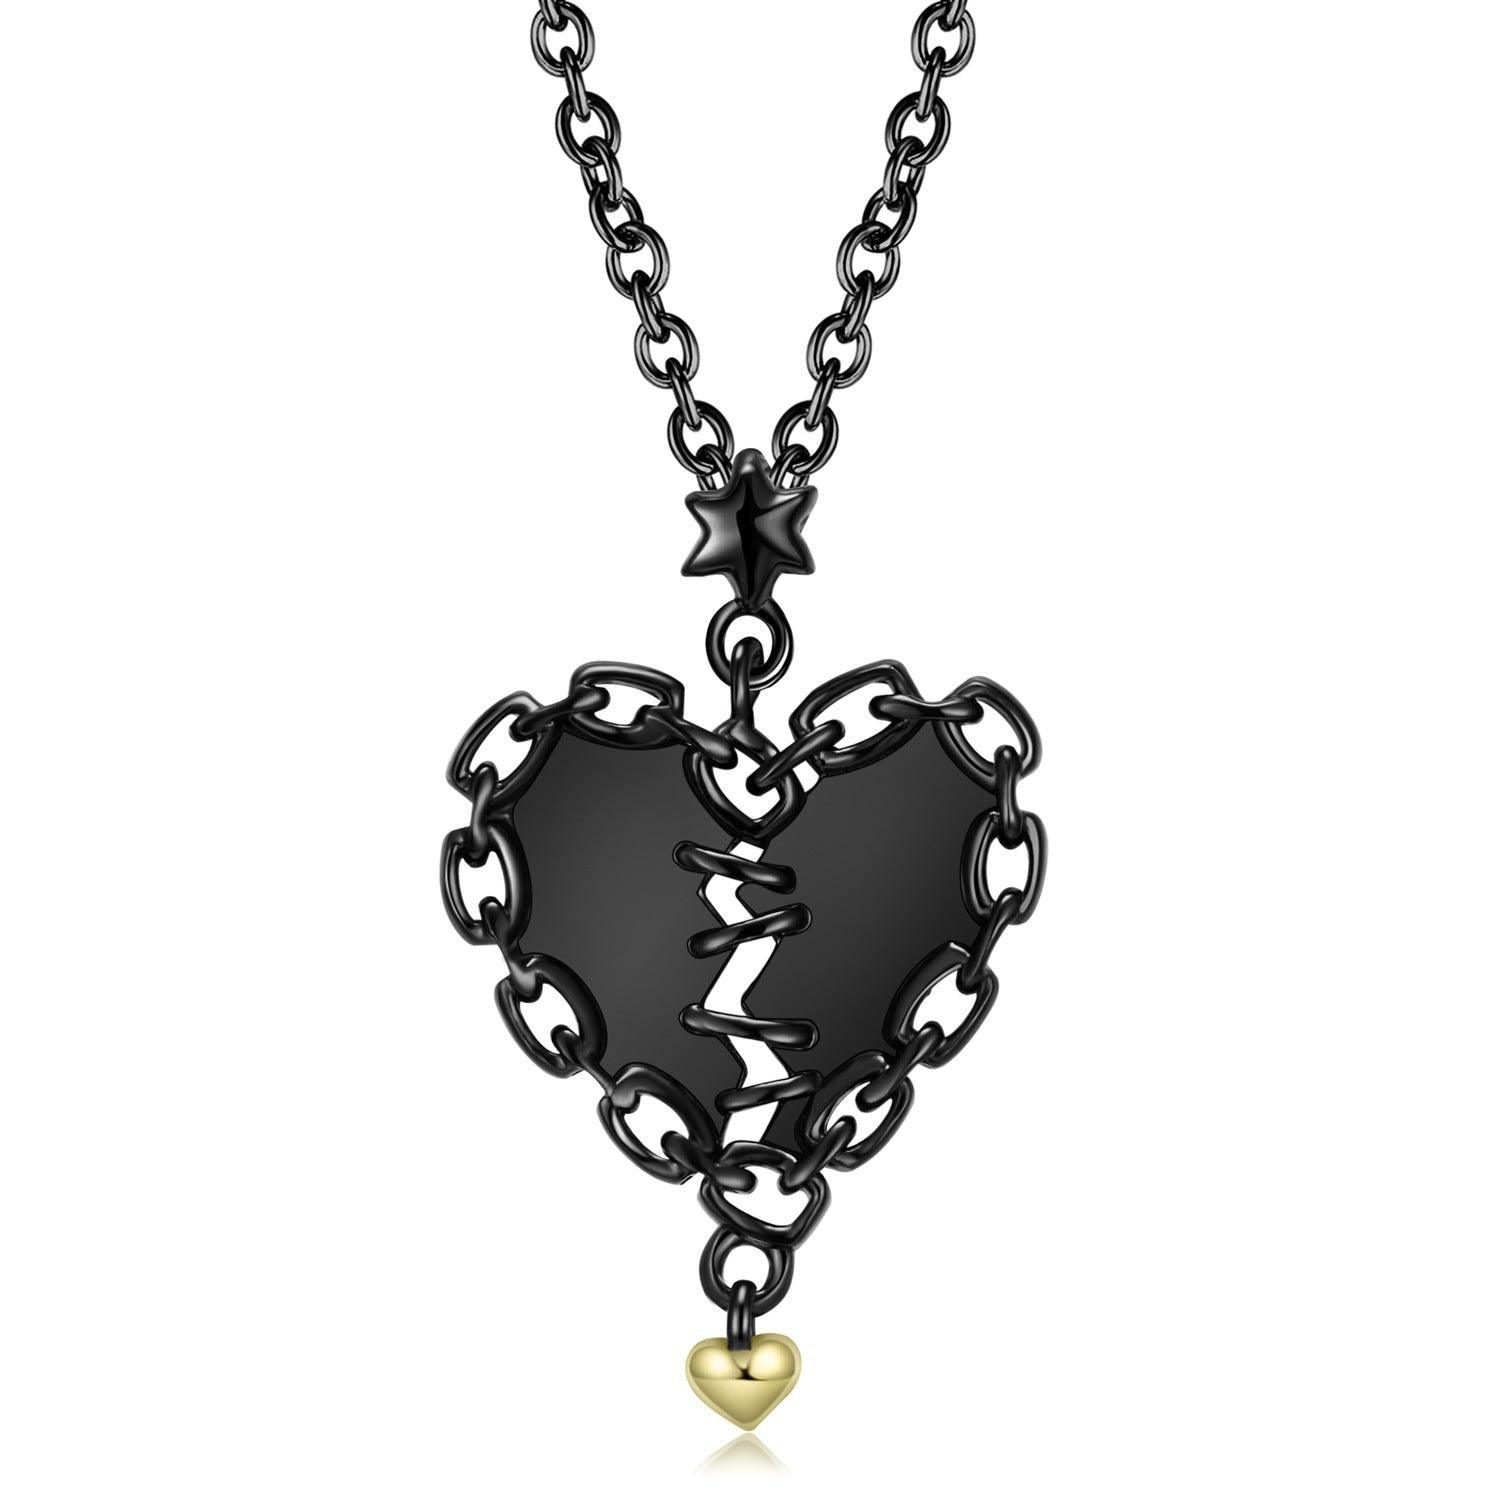 Sewn Heart Cute Black GoldS925 Silver Necklace for Christmas 2023 | Sewn Heart Cute Black GoldS925 Silver Necklace - undefined | Black GoldS925 Silver Necklace, creative necklace, S925 Sterling Silver Necklace, Sewn Heart Necklace | From Hunny Life | hunnylife.com